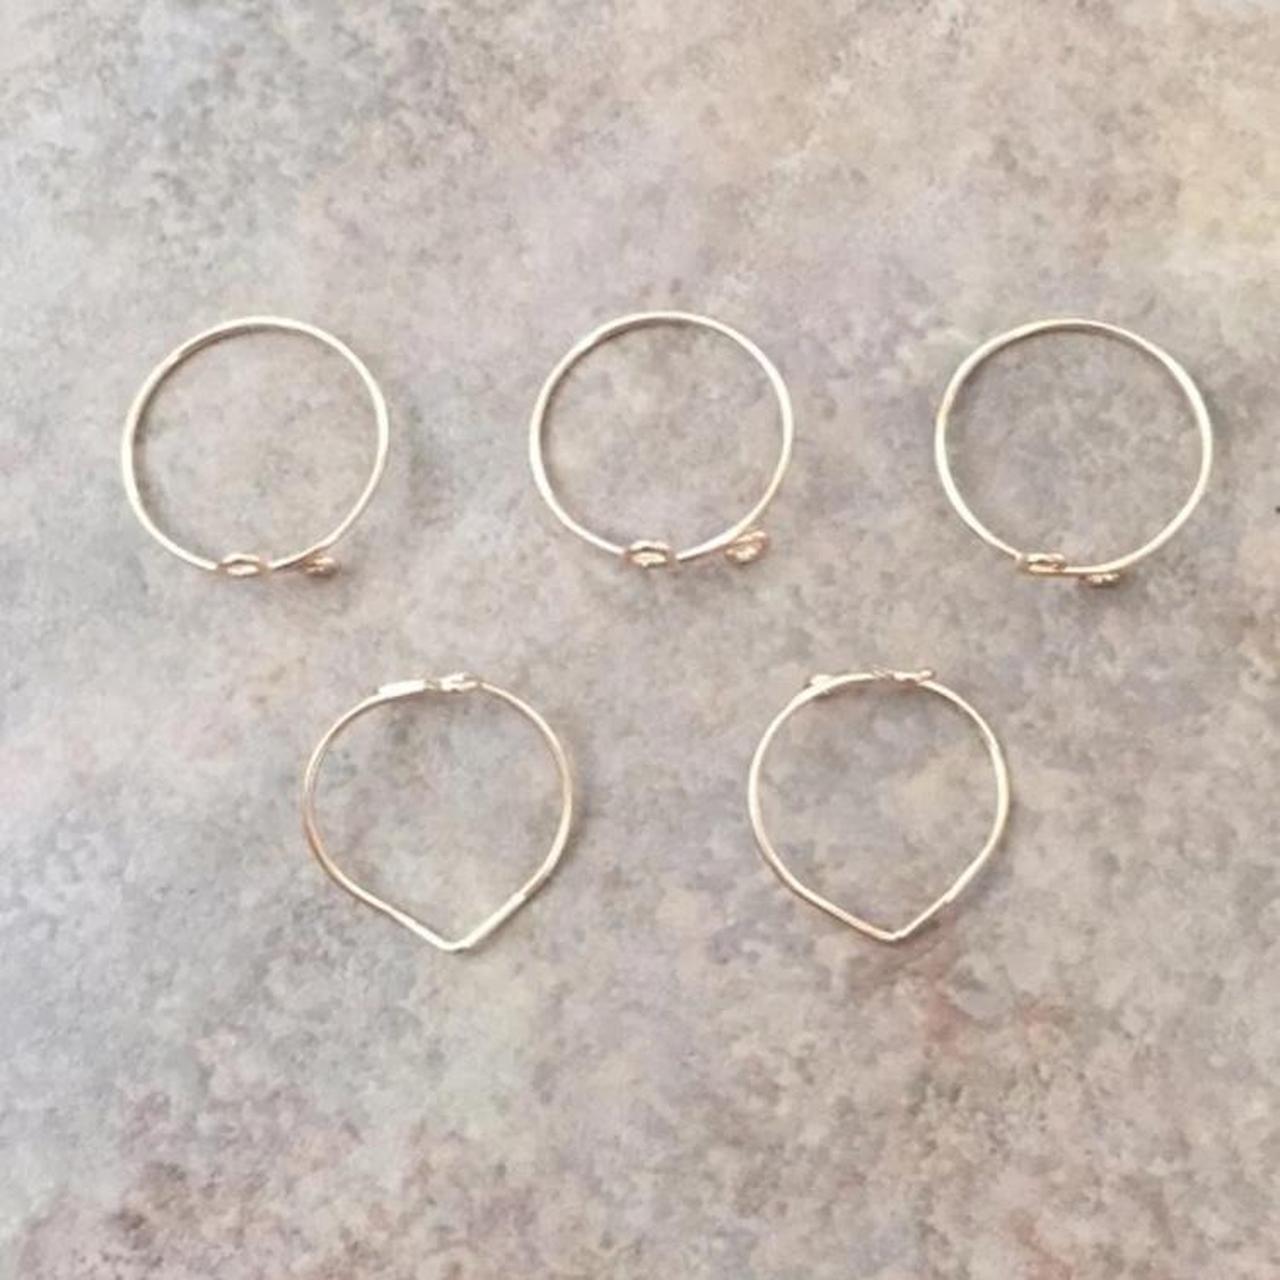 Product Image 4 - 5pcs gold midi rings
Condition: 100%